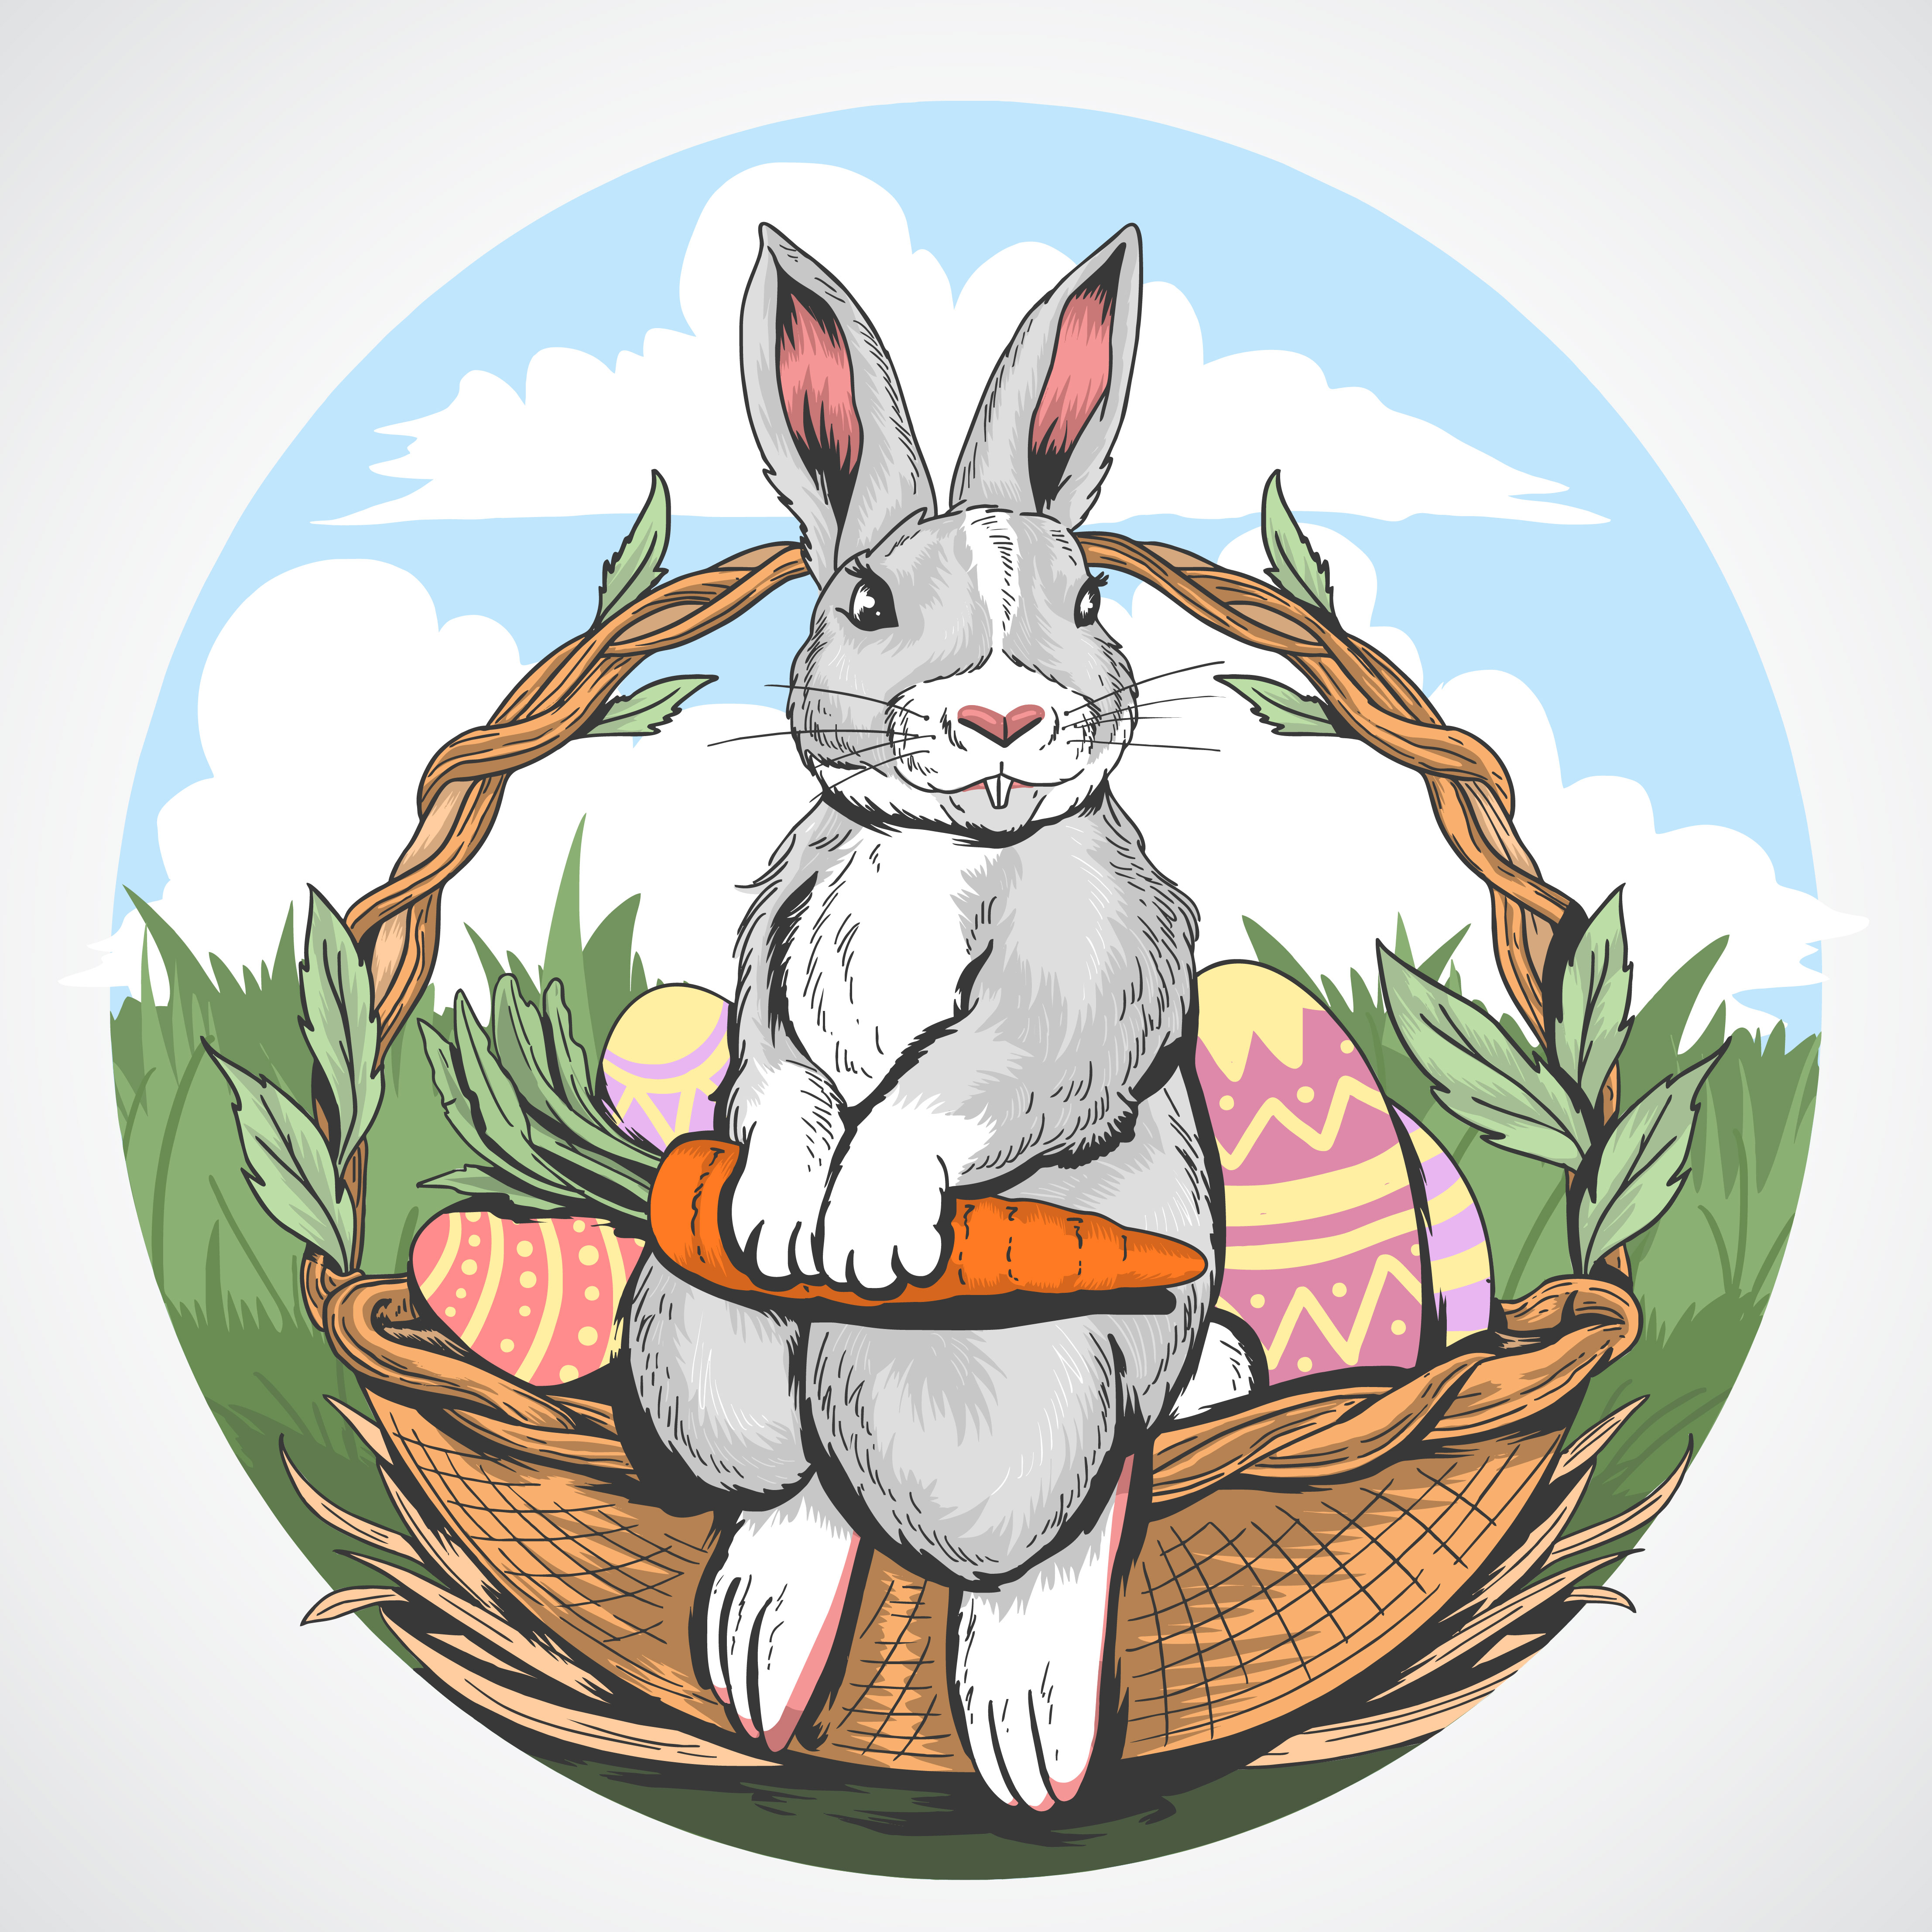 Traditional Easter bunny design with rabbit holding carrot sitting in baske...